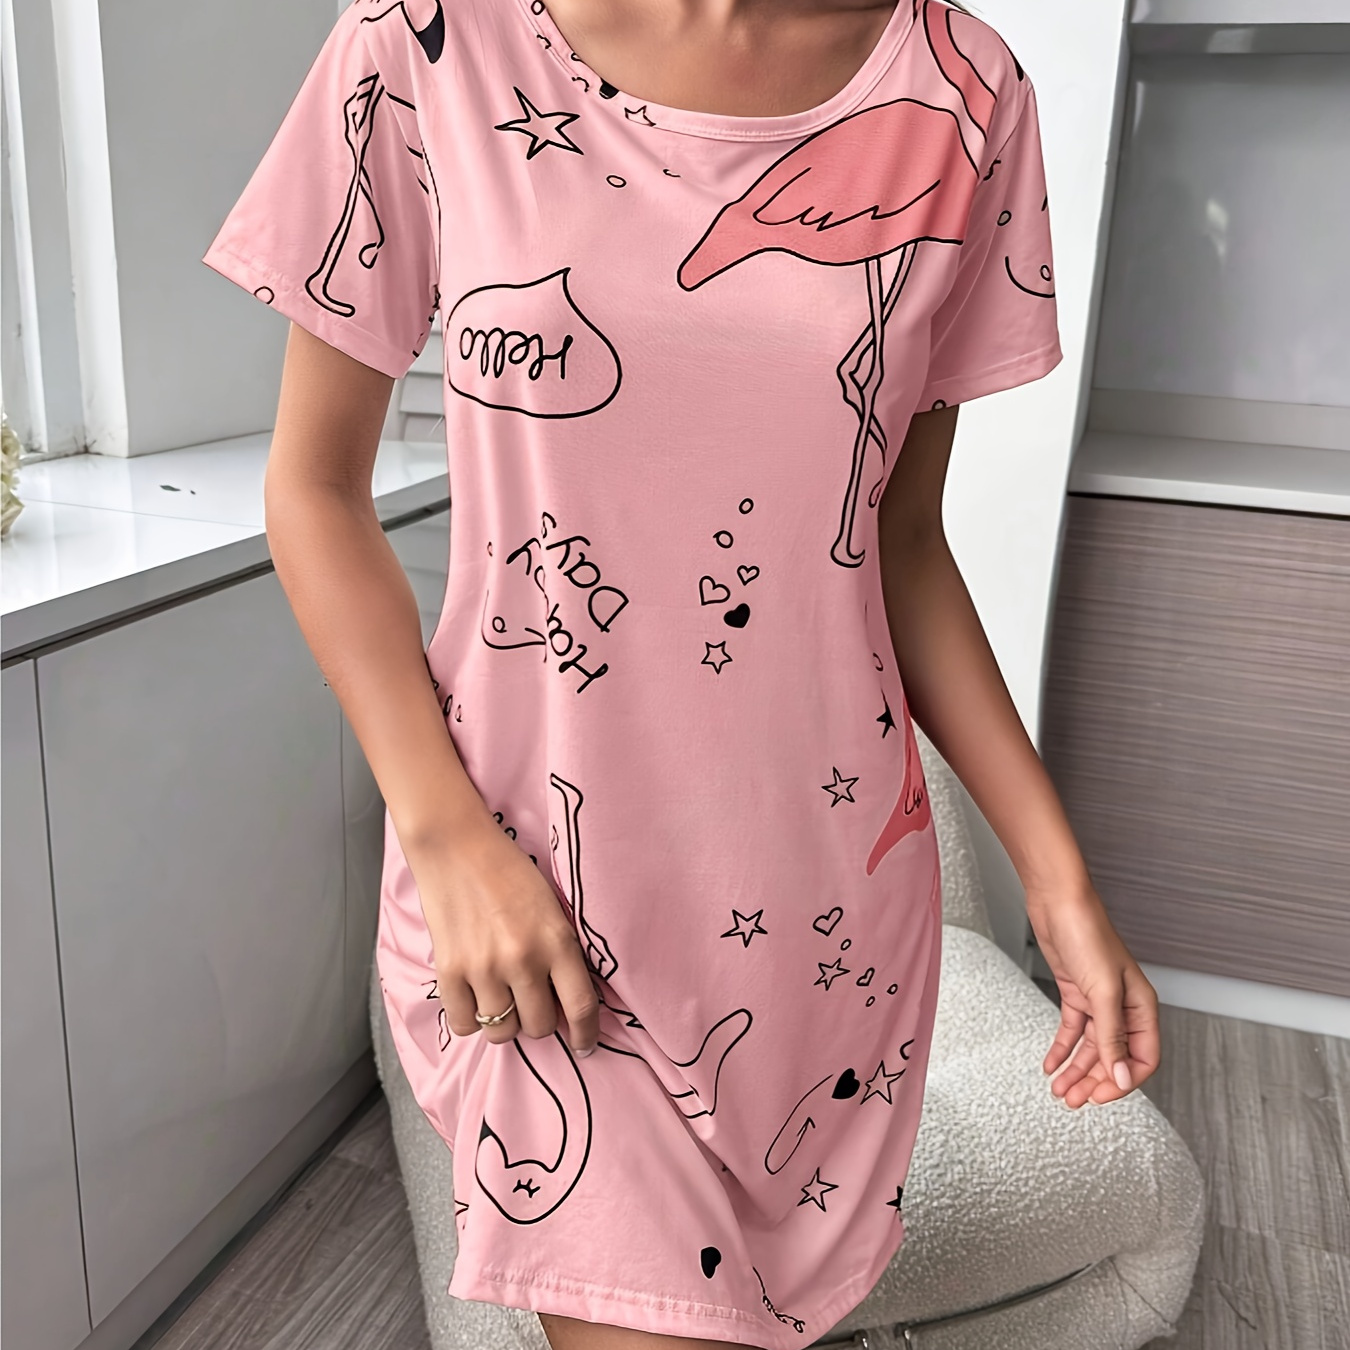 

Flamingo & Letter Print Nightgown, Casual Short Sleeve Round Neck Loose Fit Tee Dress, Women's Sleepwear